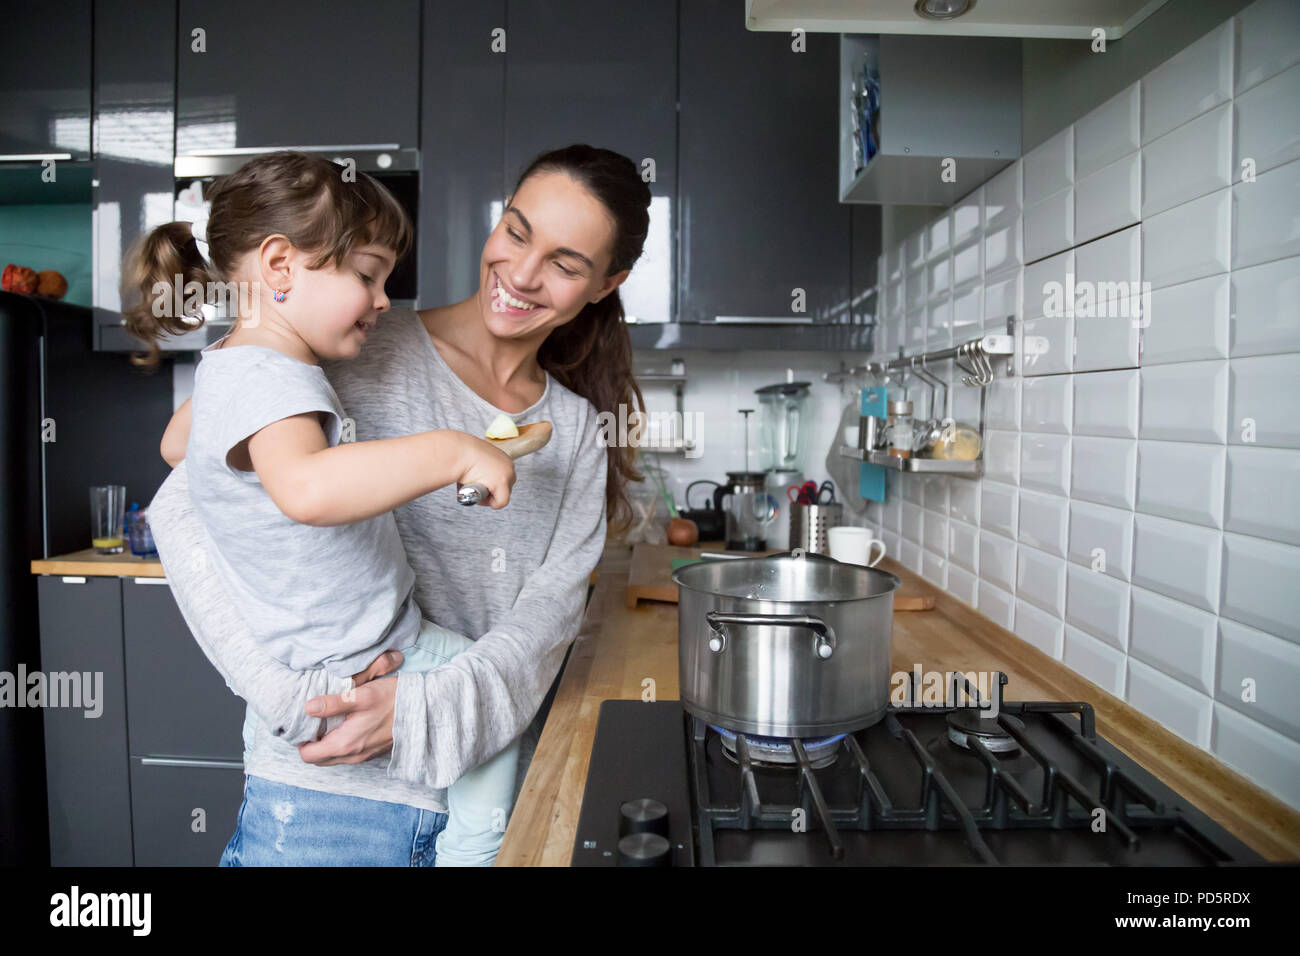 Smiling mom holding kid daughter curious about cooking in kitche Stock Photo